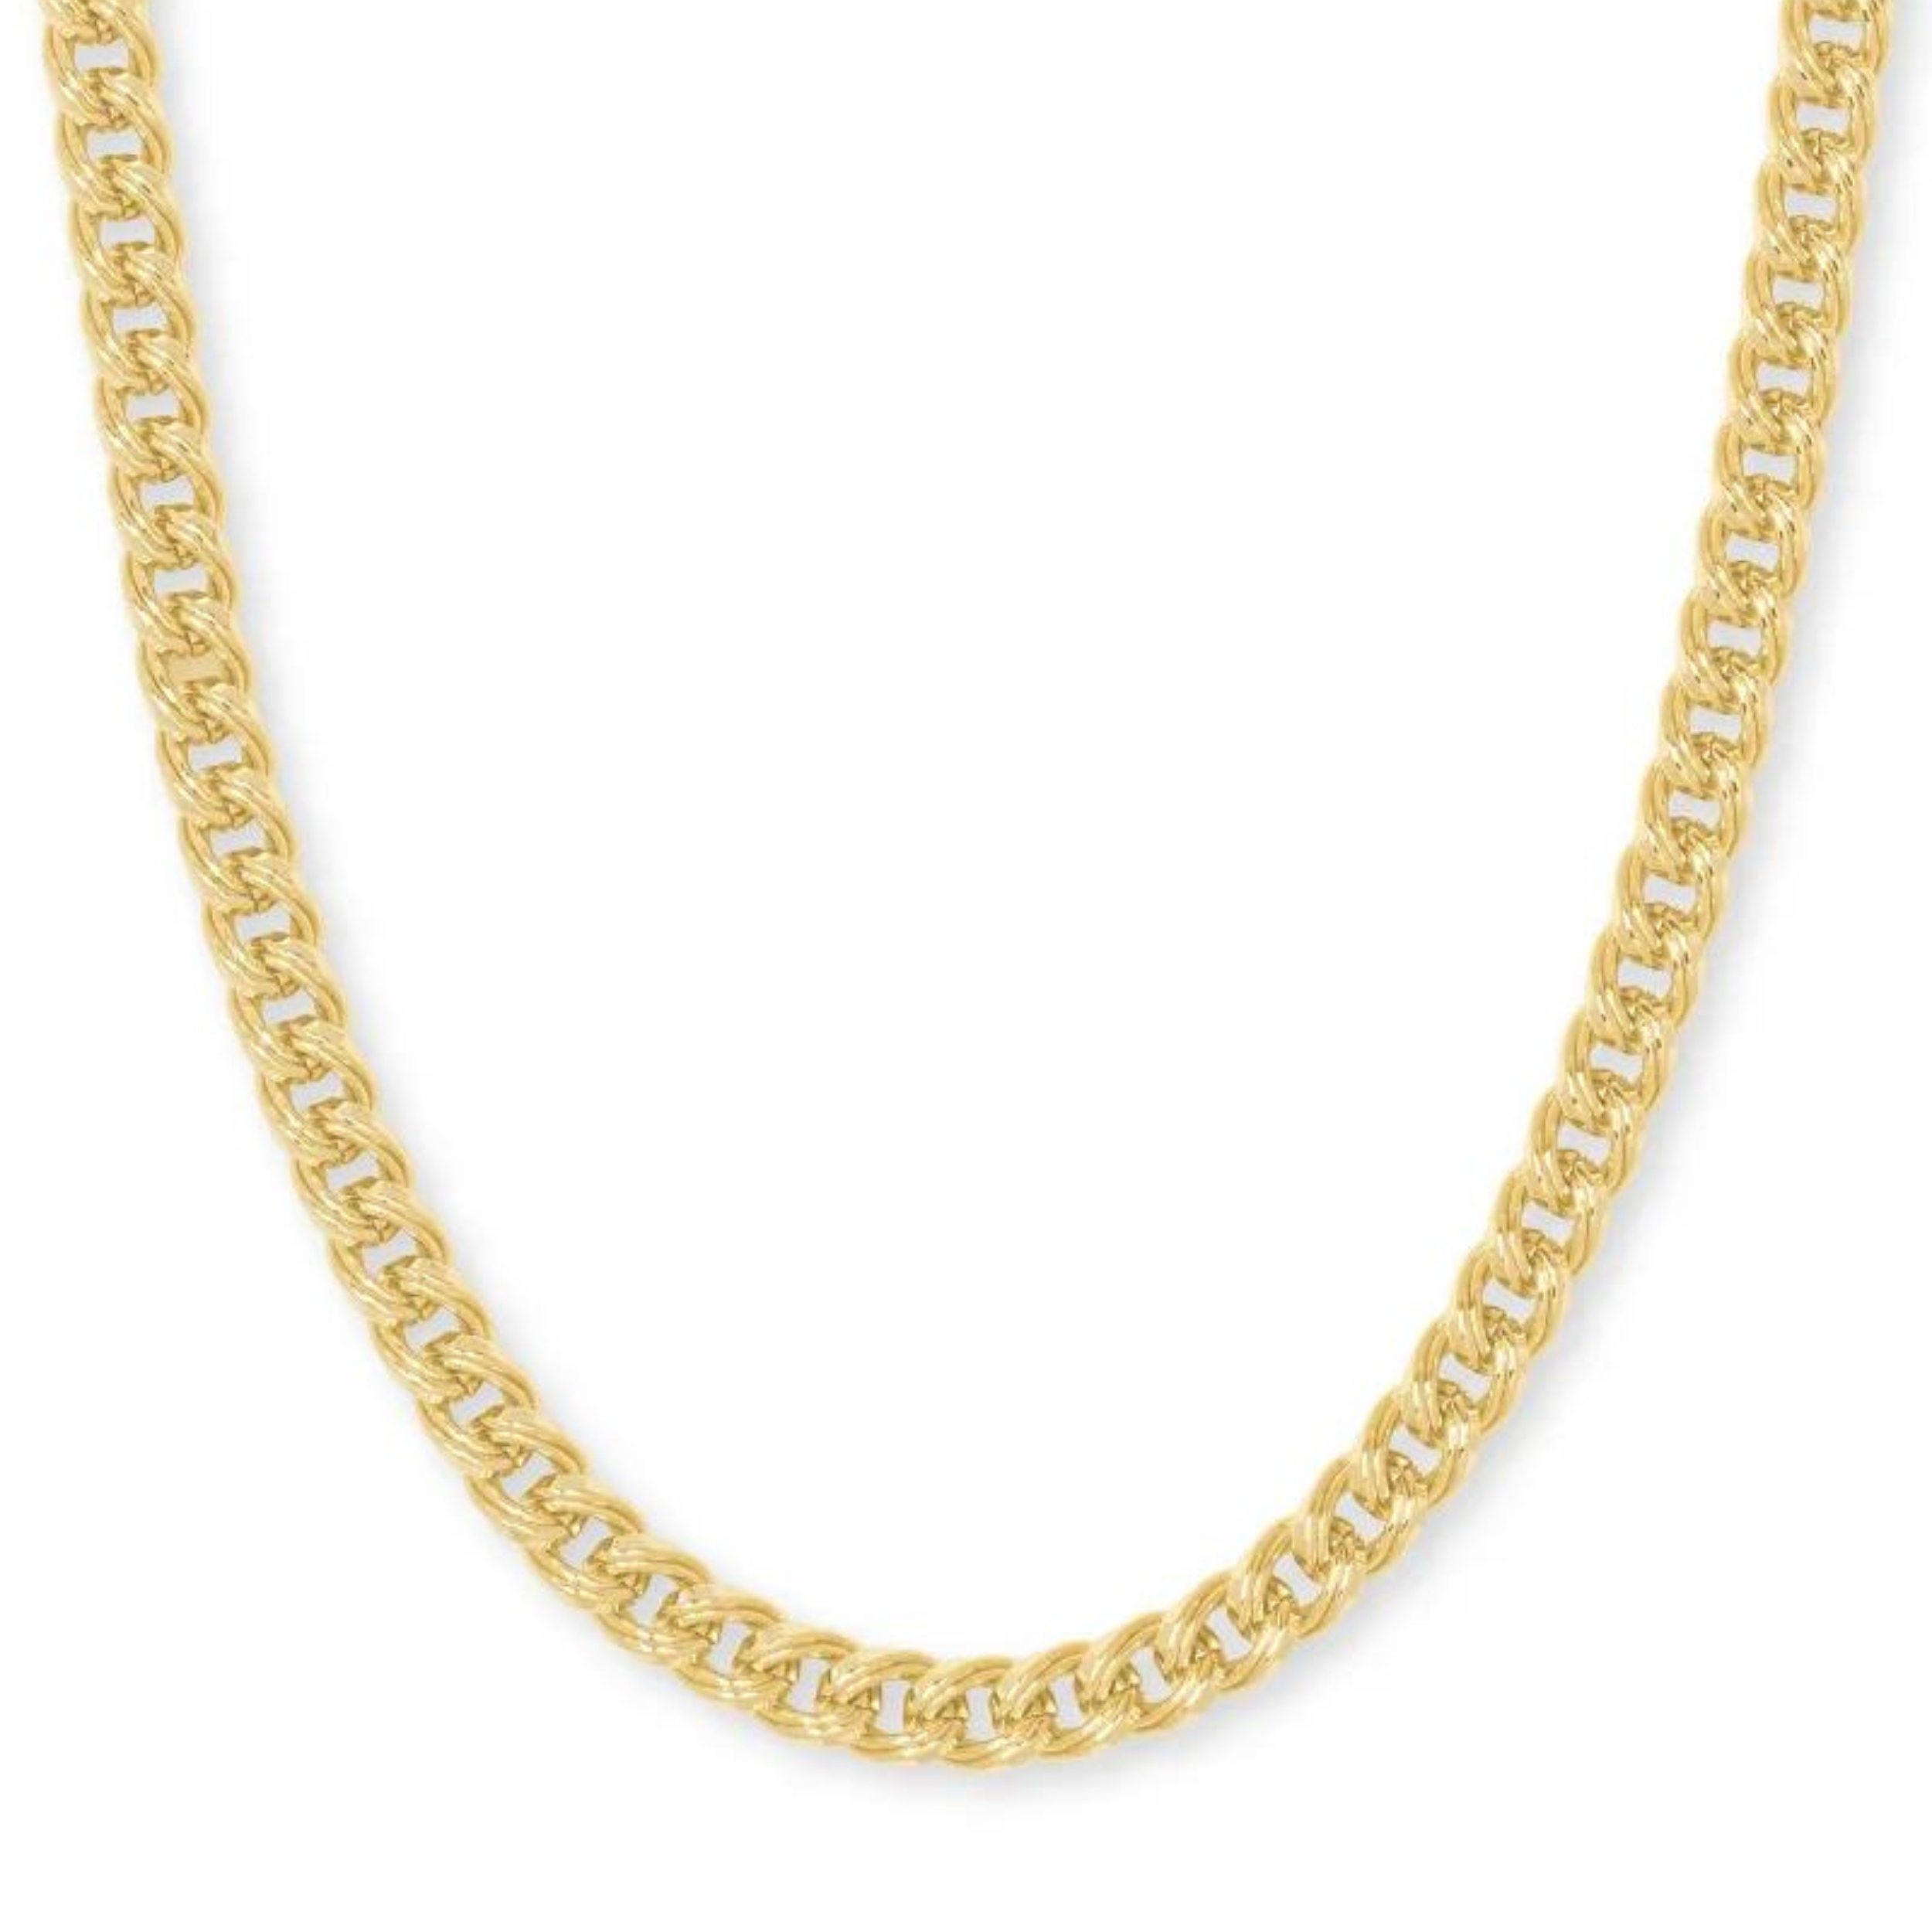 Gold chain link necklace, pictured on a white background.